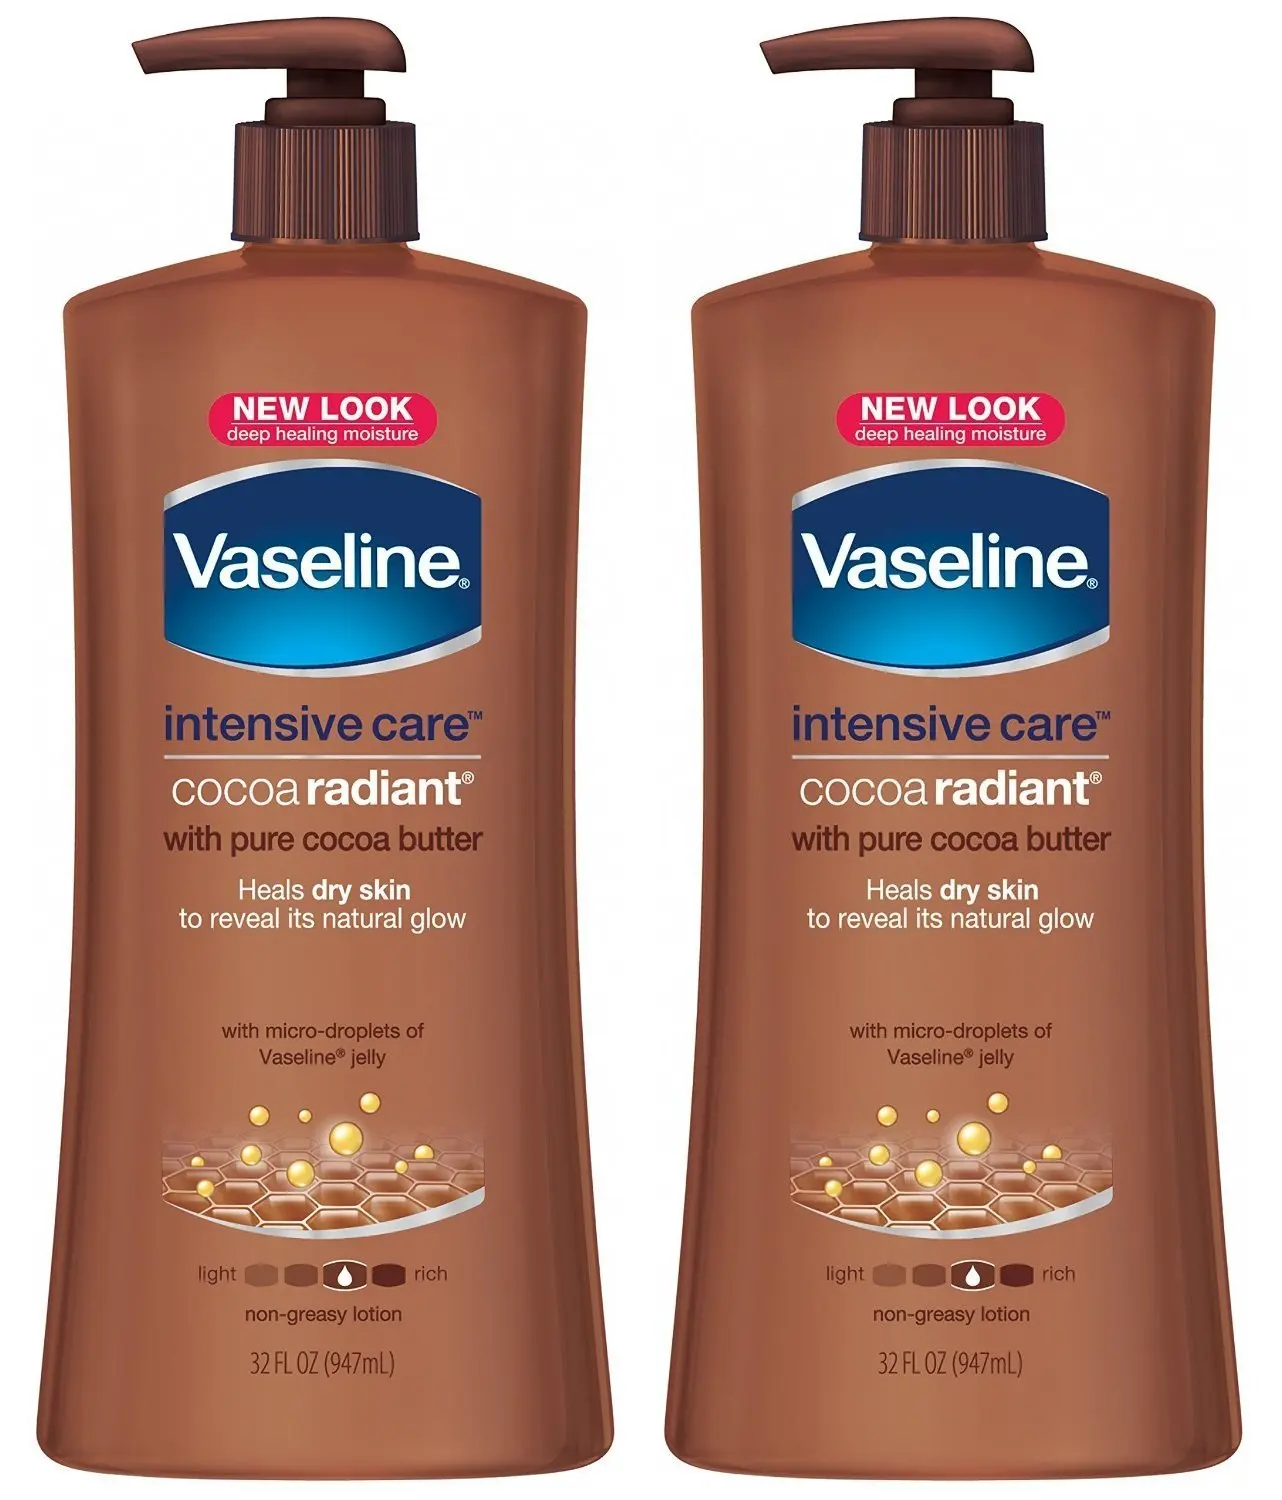 Cheap cocoa butter lotion vaseline, find cocoa butter lotion vaseline dea.....